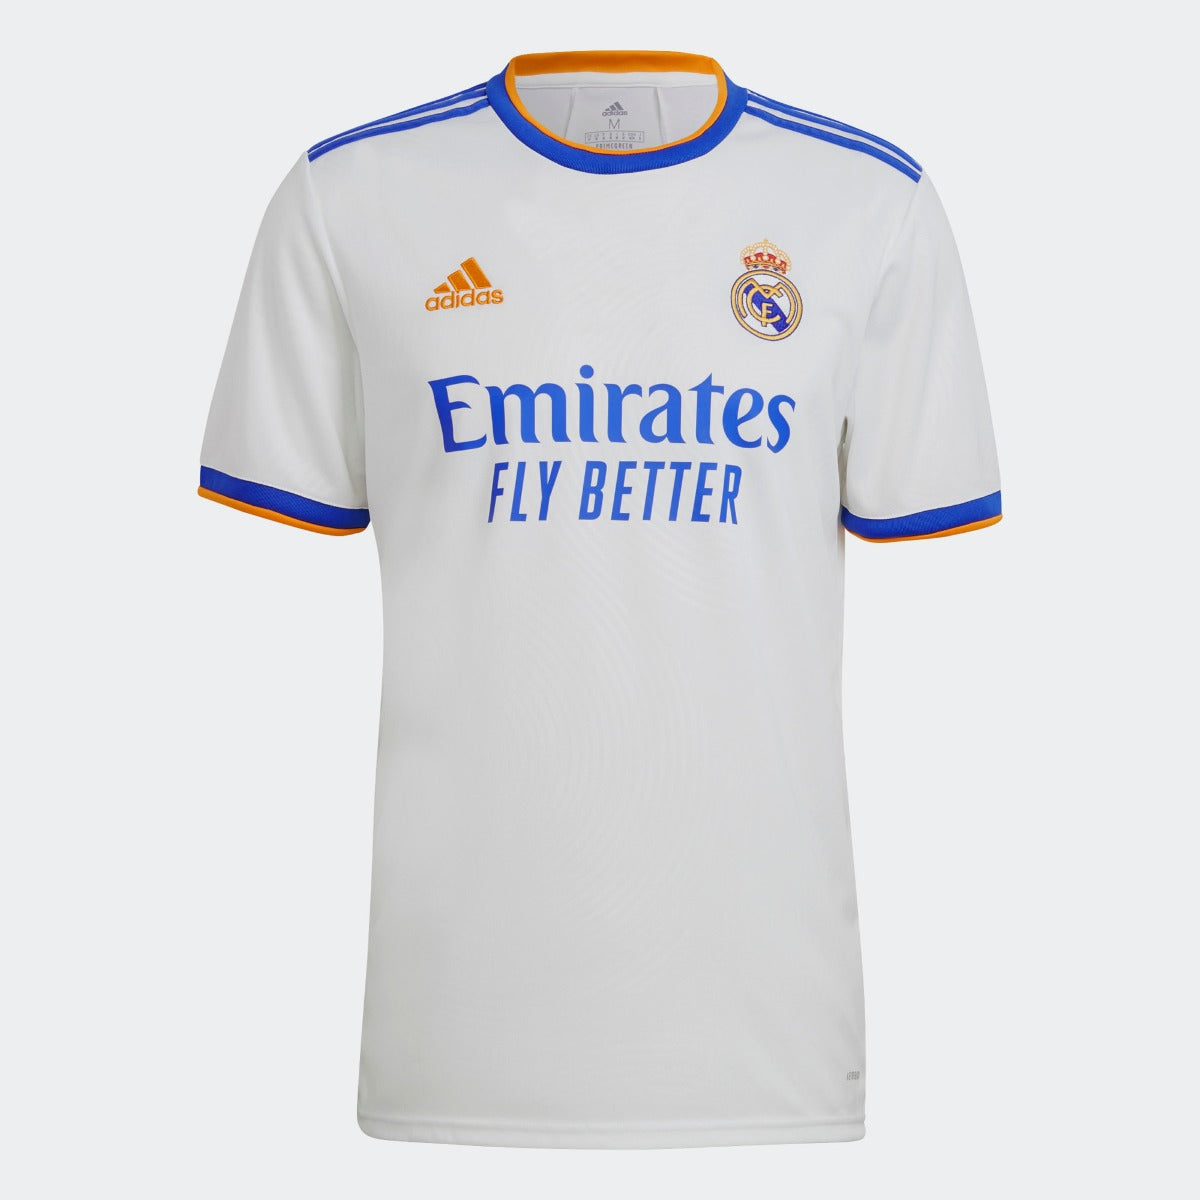 Adidas 2021-22 Real Madrid Home Jersey - White-Blue-Orange (Front)